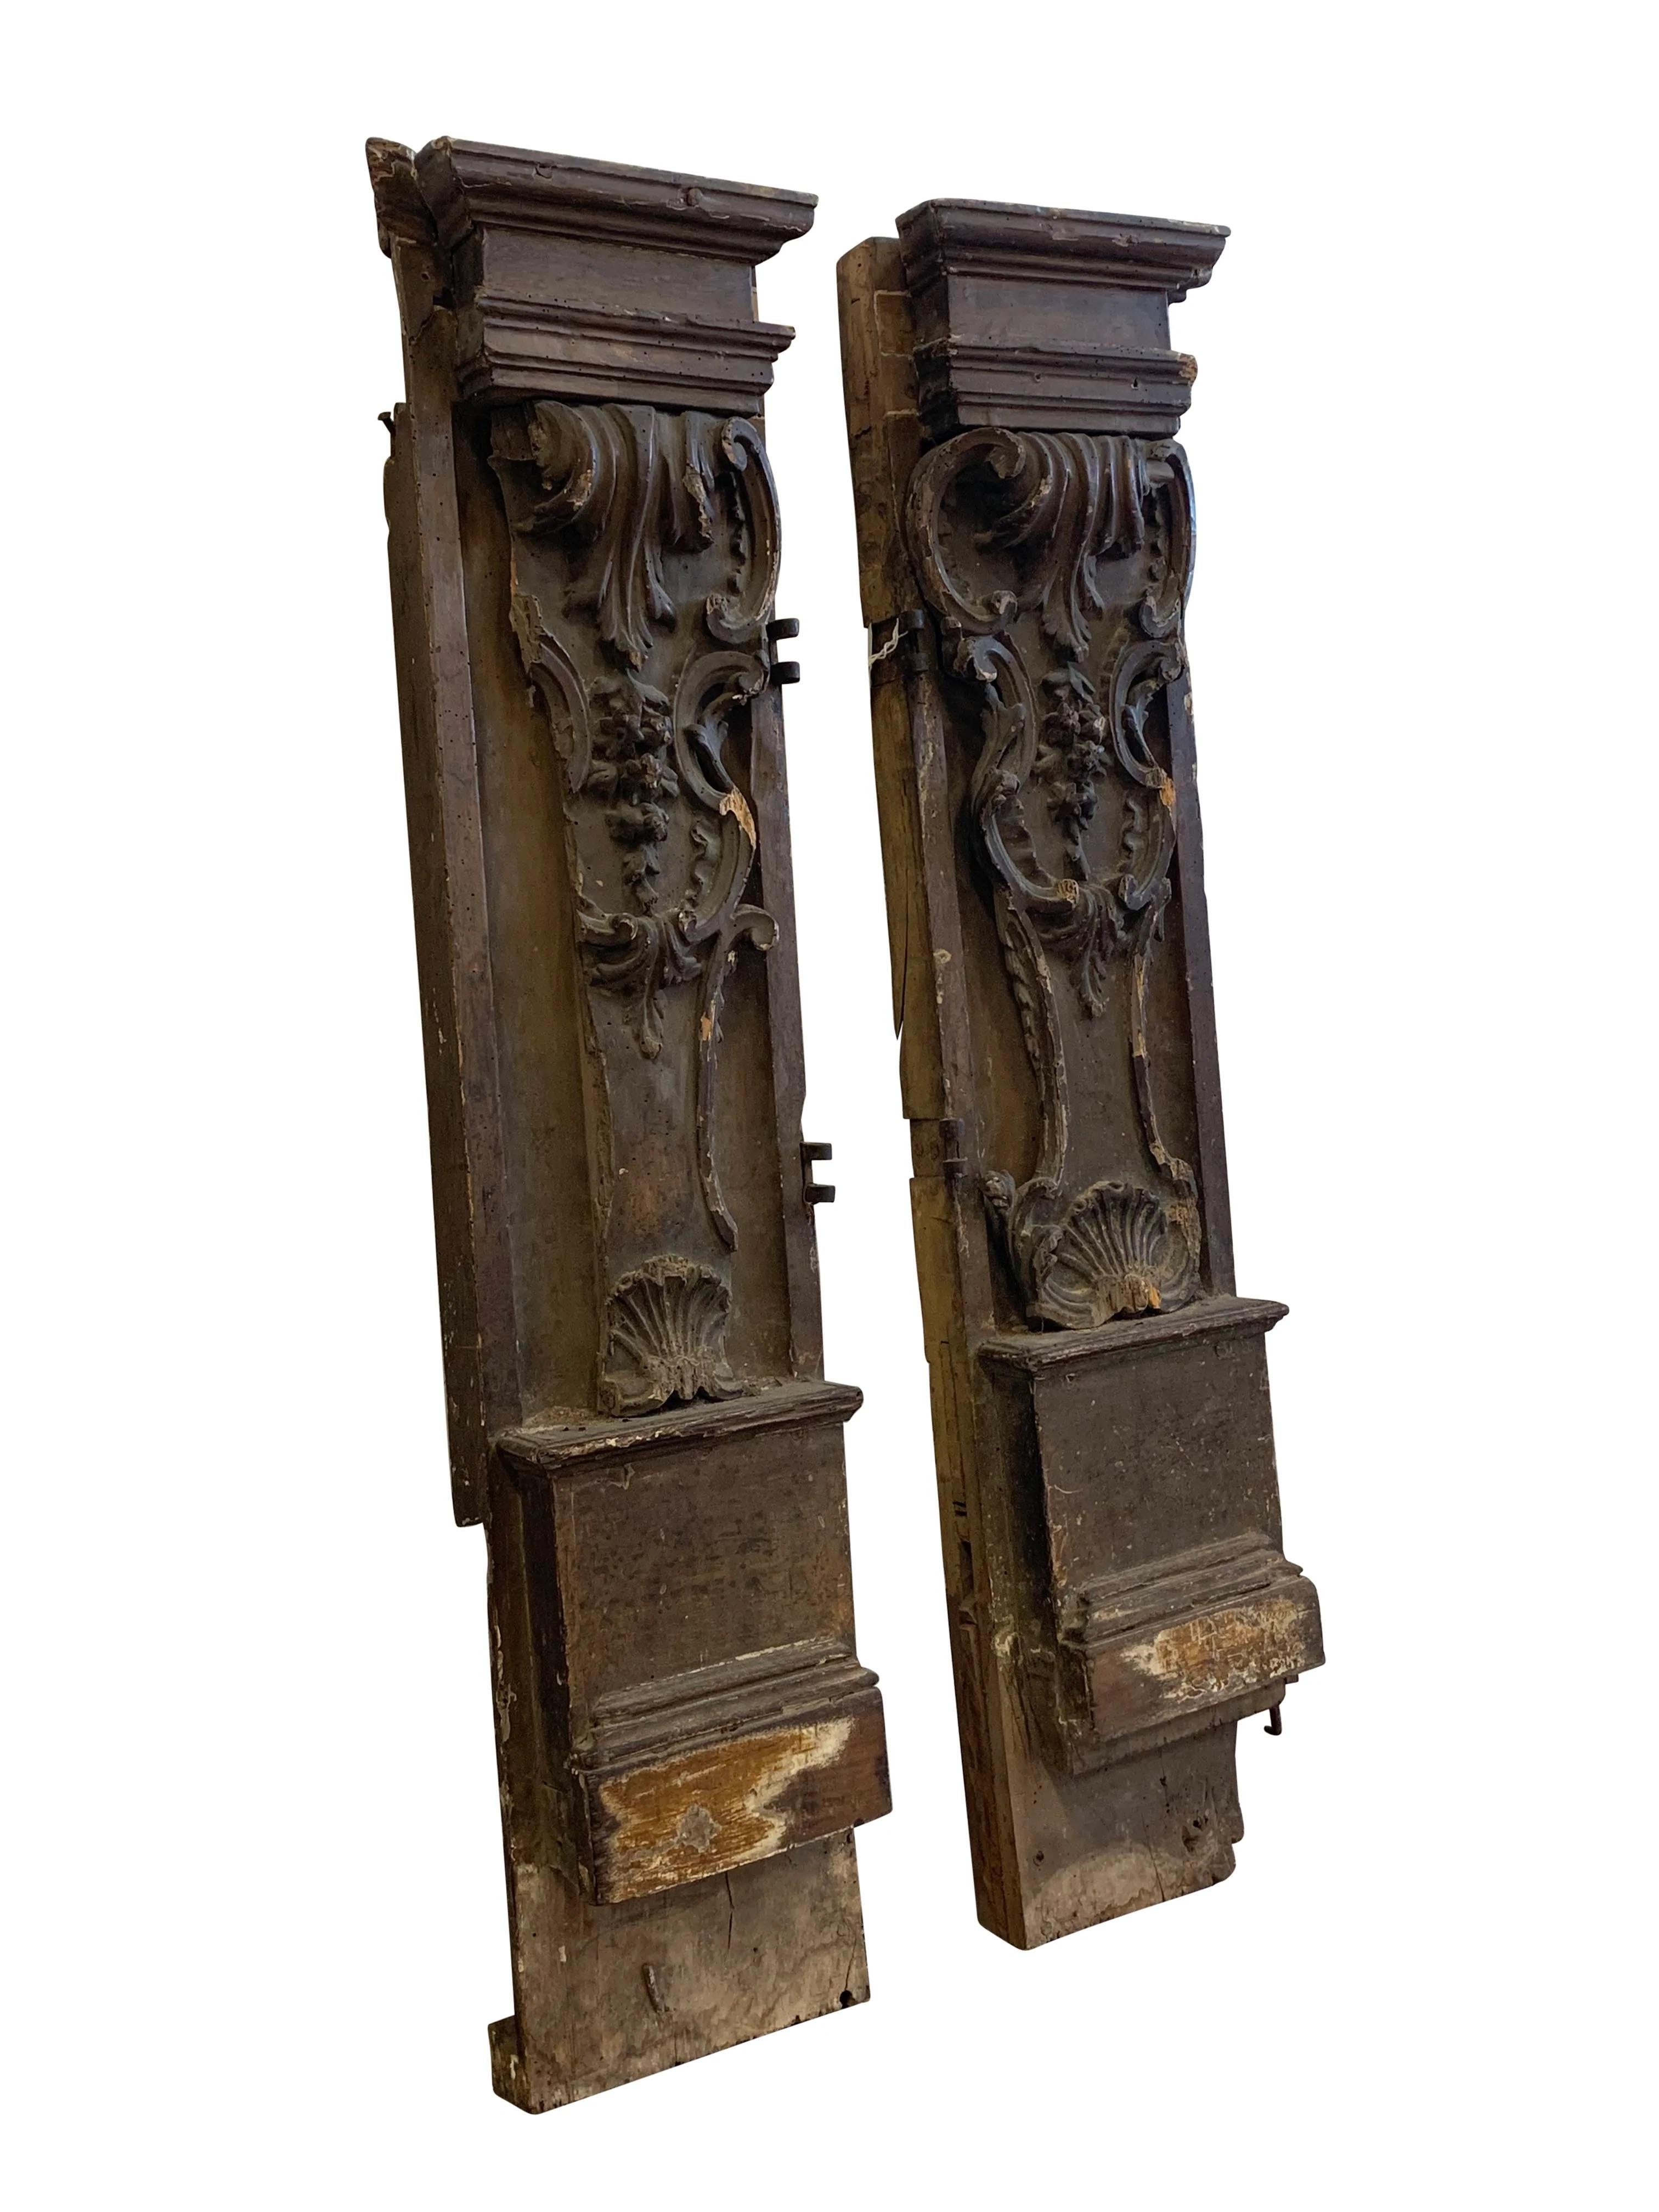 Beautiful and unique pair of 19th century Italian cathedral gate fragments. Perfect to convert and use as tall table lamps or to use as architectural fragments on the wall as art.